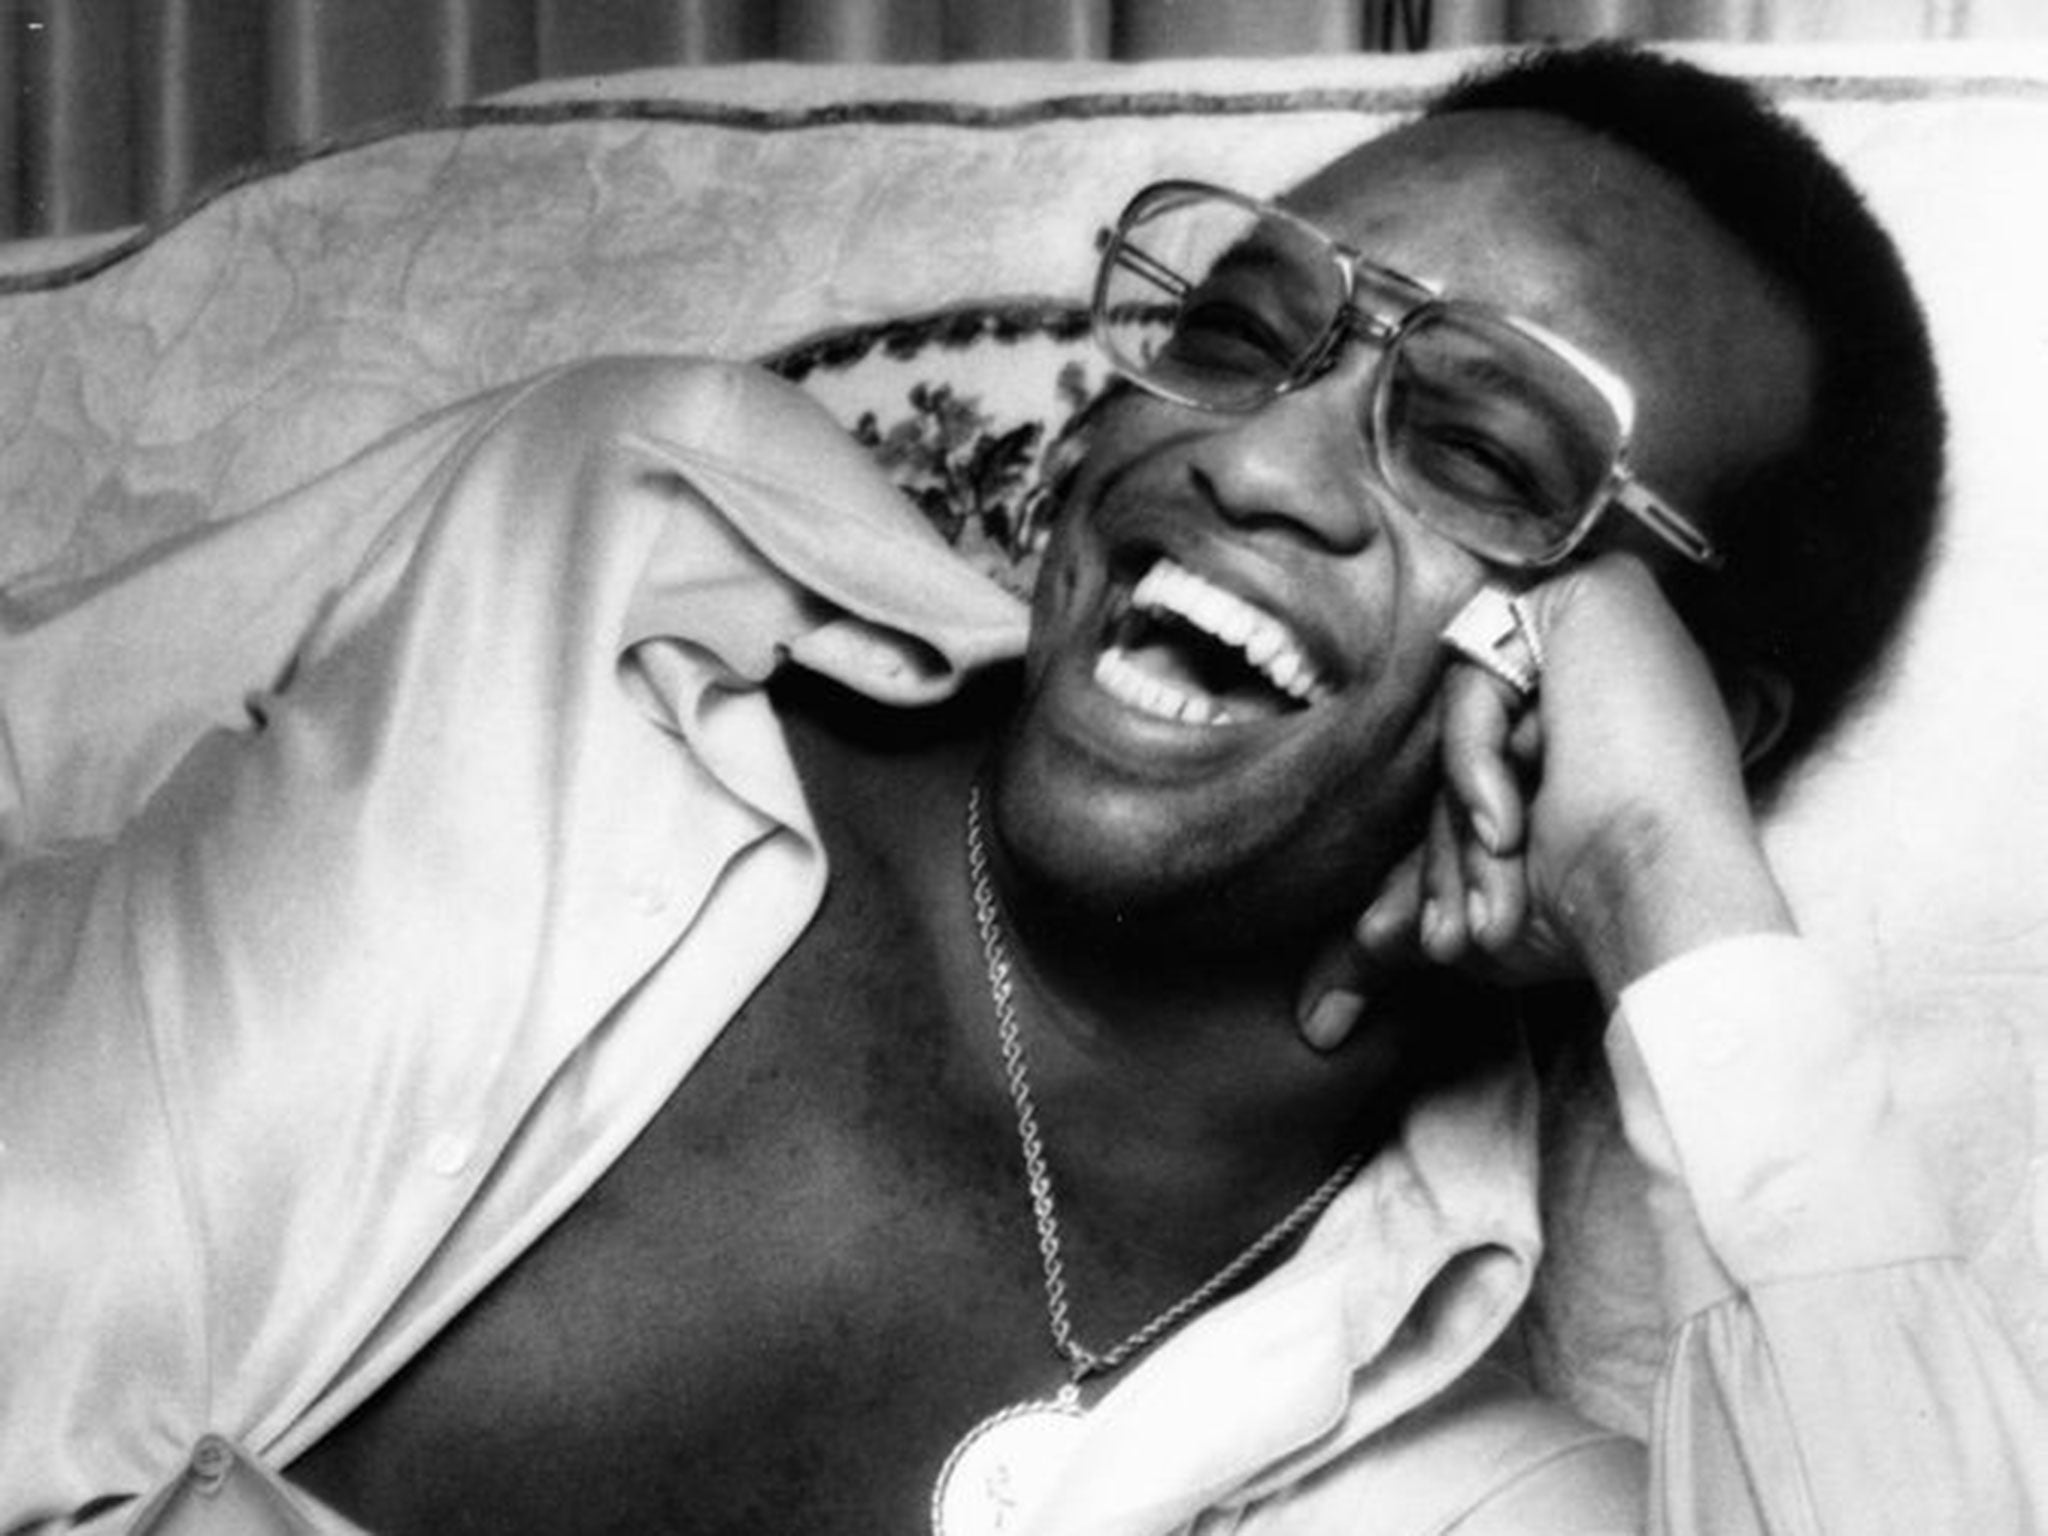 Bobby Womack, 1944-2014: ‘Maybe if I wasn’t high, my life might not have lasted so long’